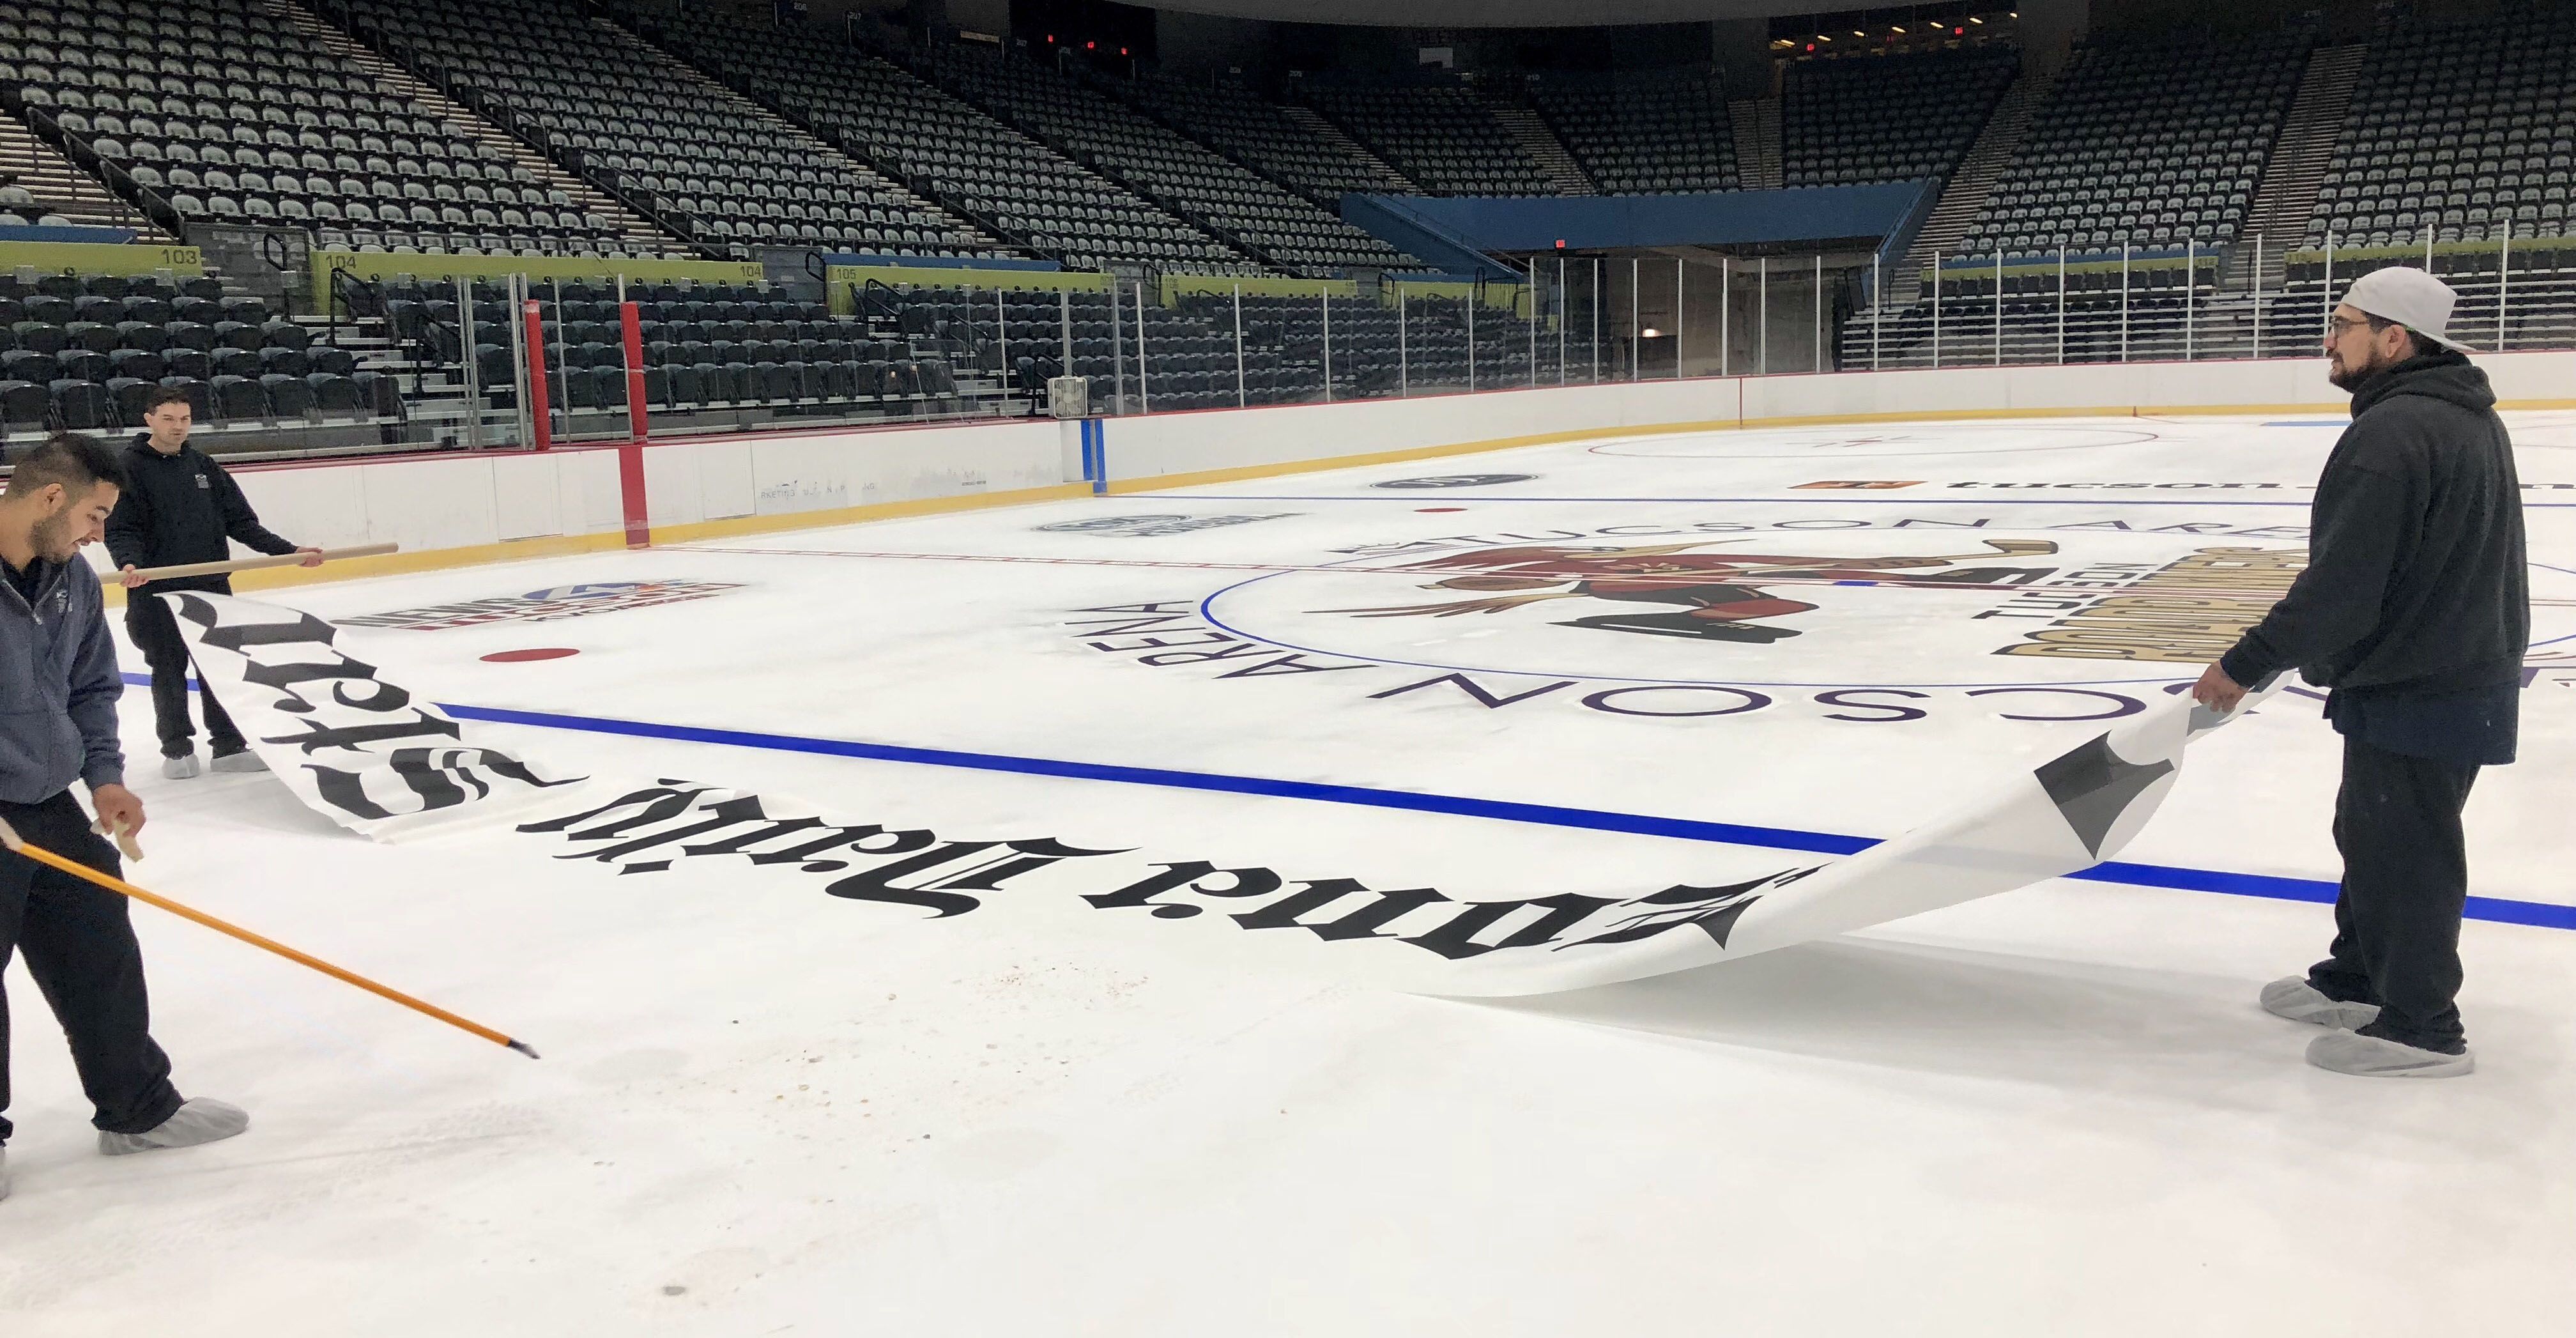 Tucson Roadrunners Hockey - Review of Tucson Convention Center